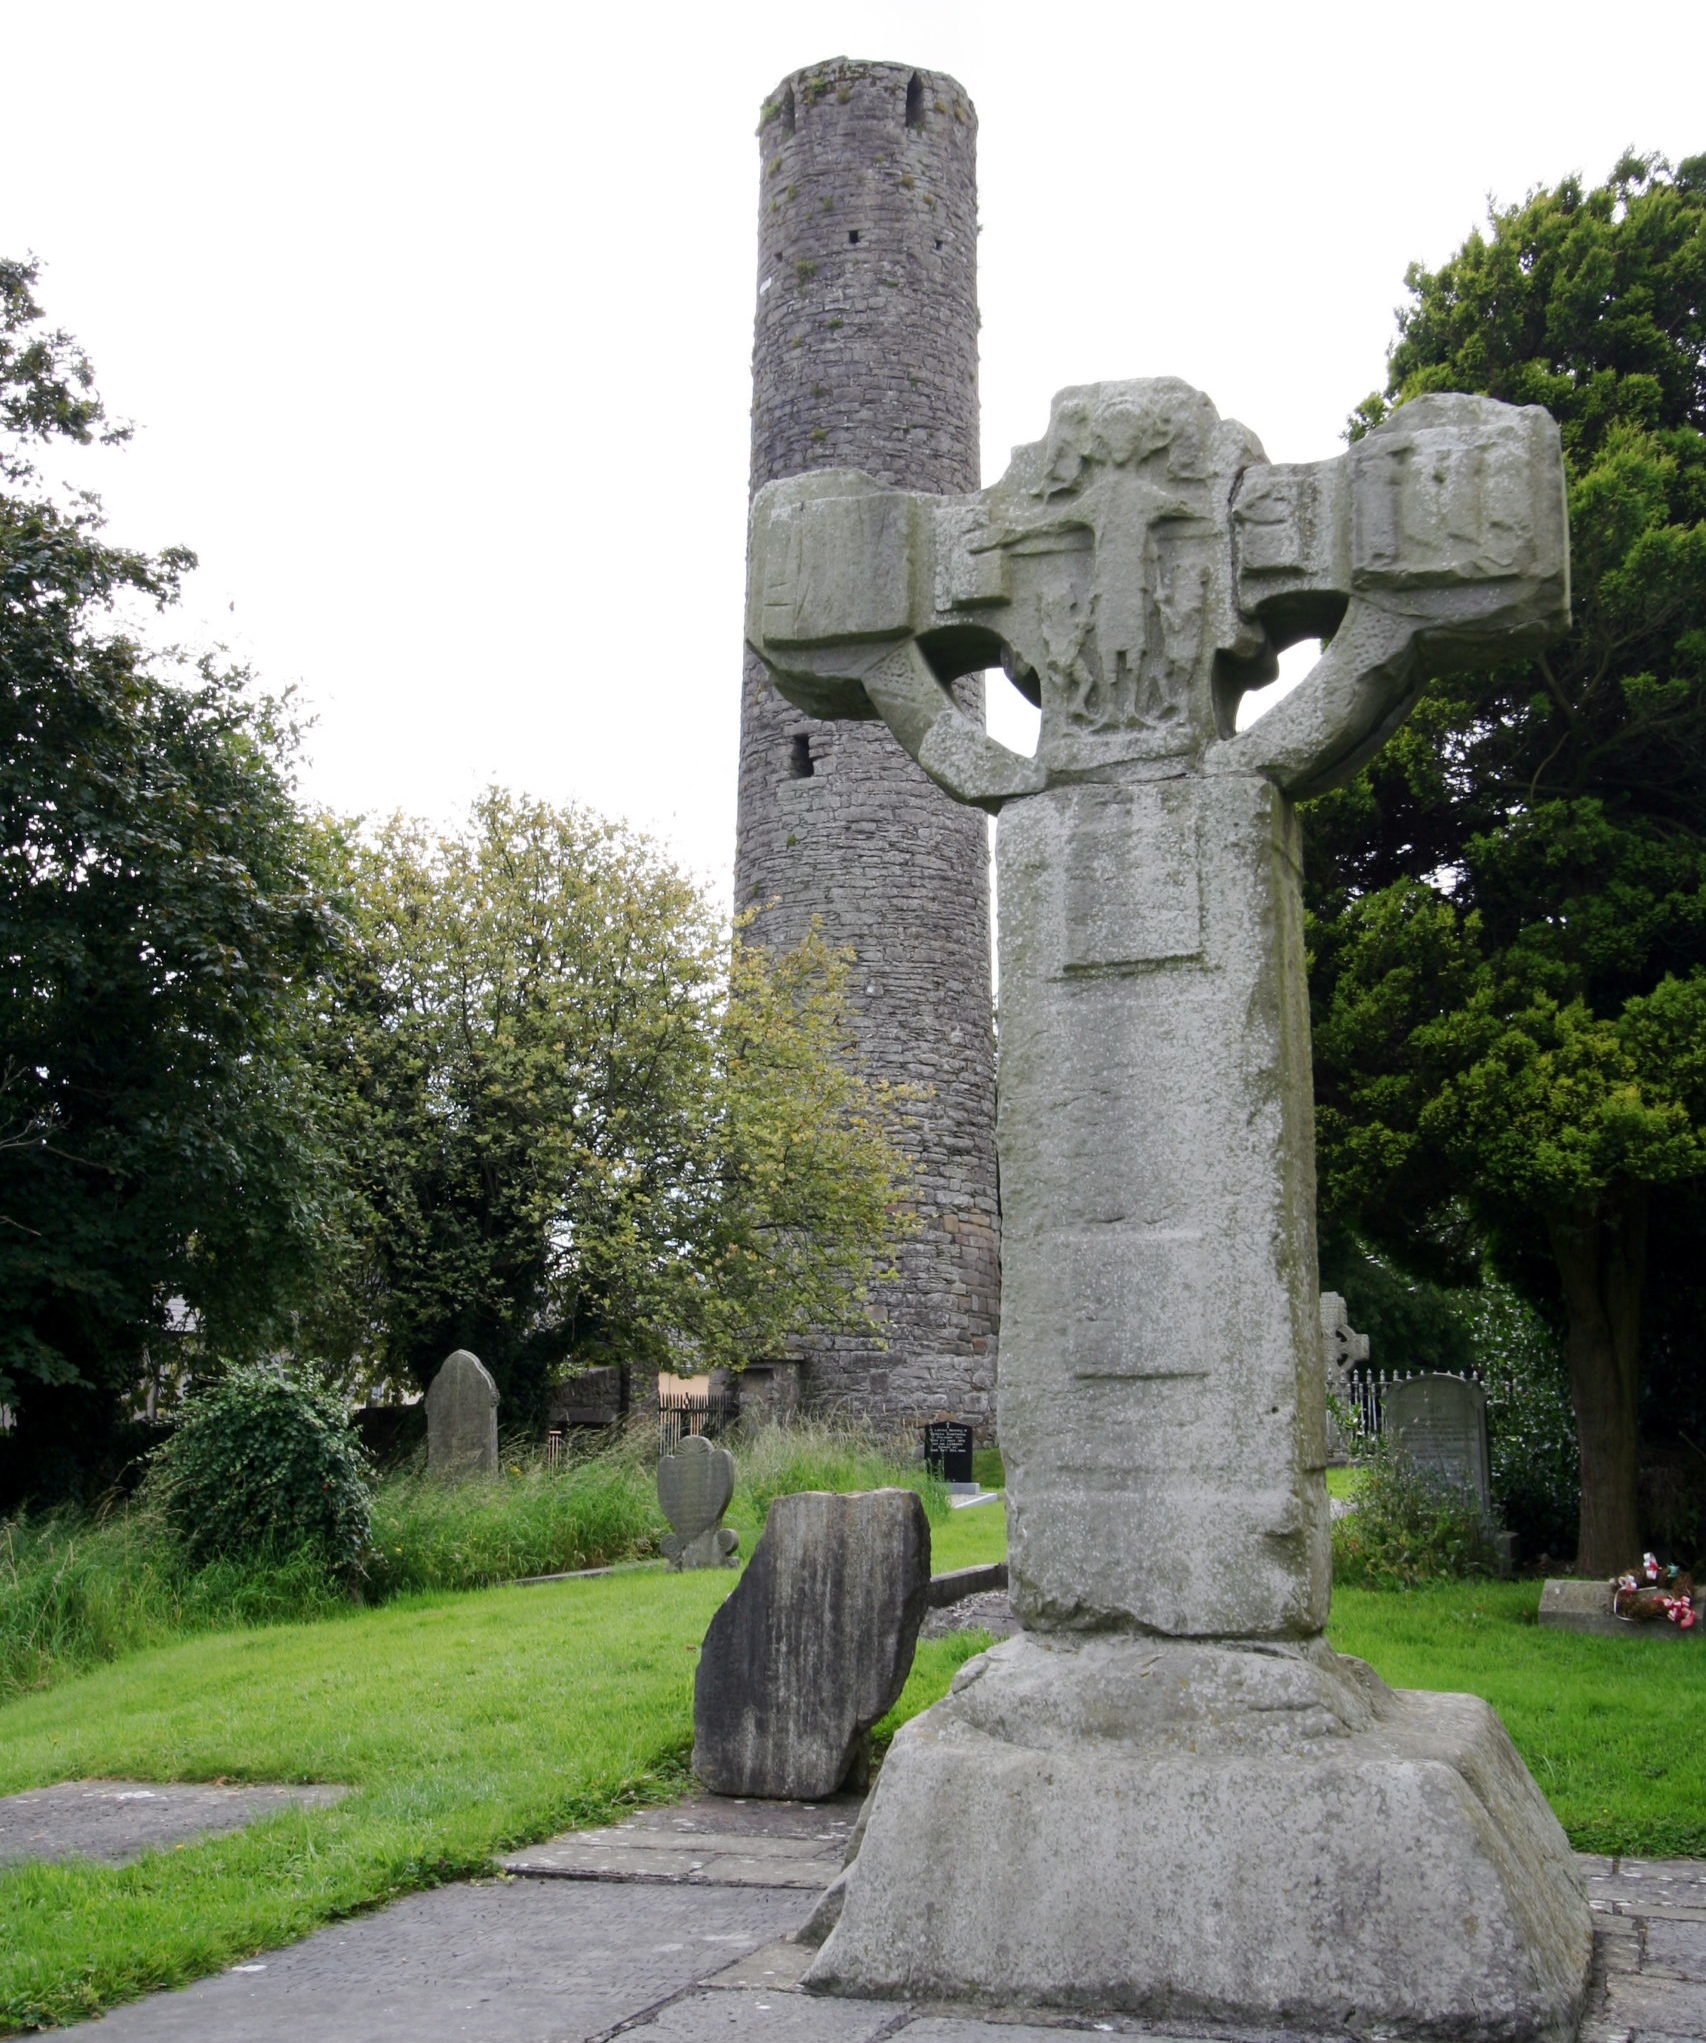 [Image: Most of a stone Celtic cross, some grave stones in a green lawn, and in the background some trees and a tall, thin stone tower.]